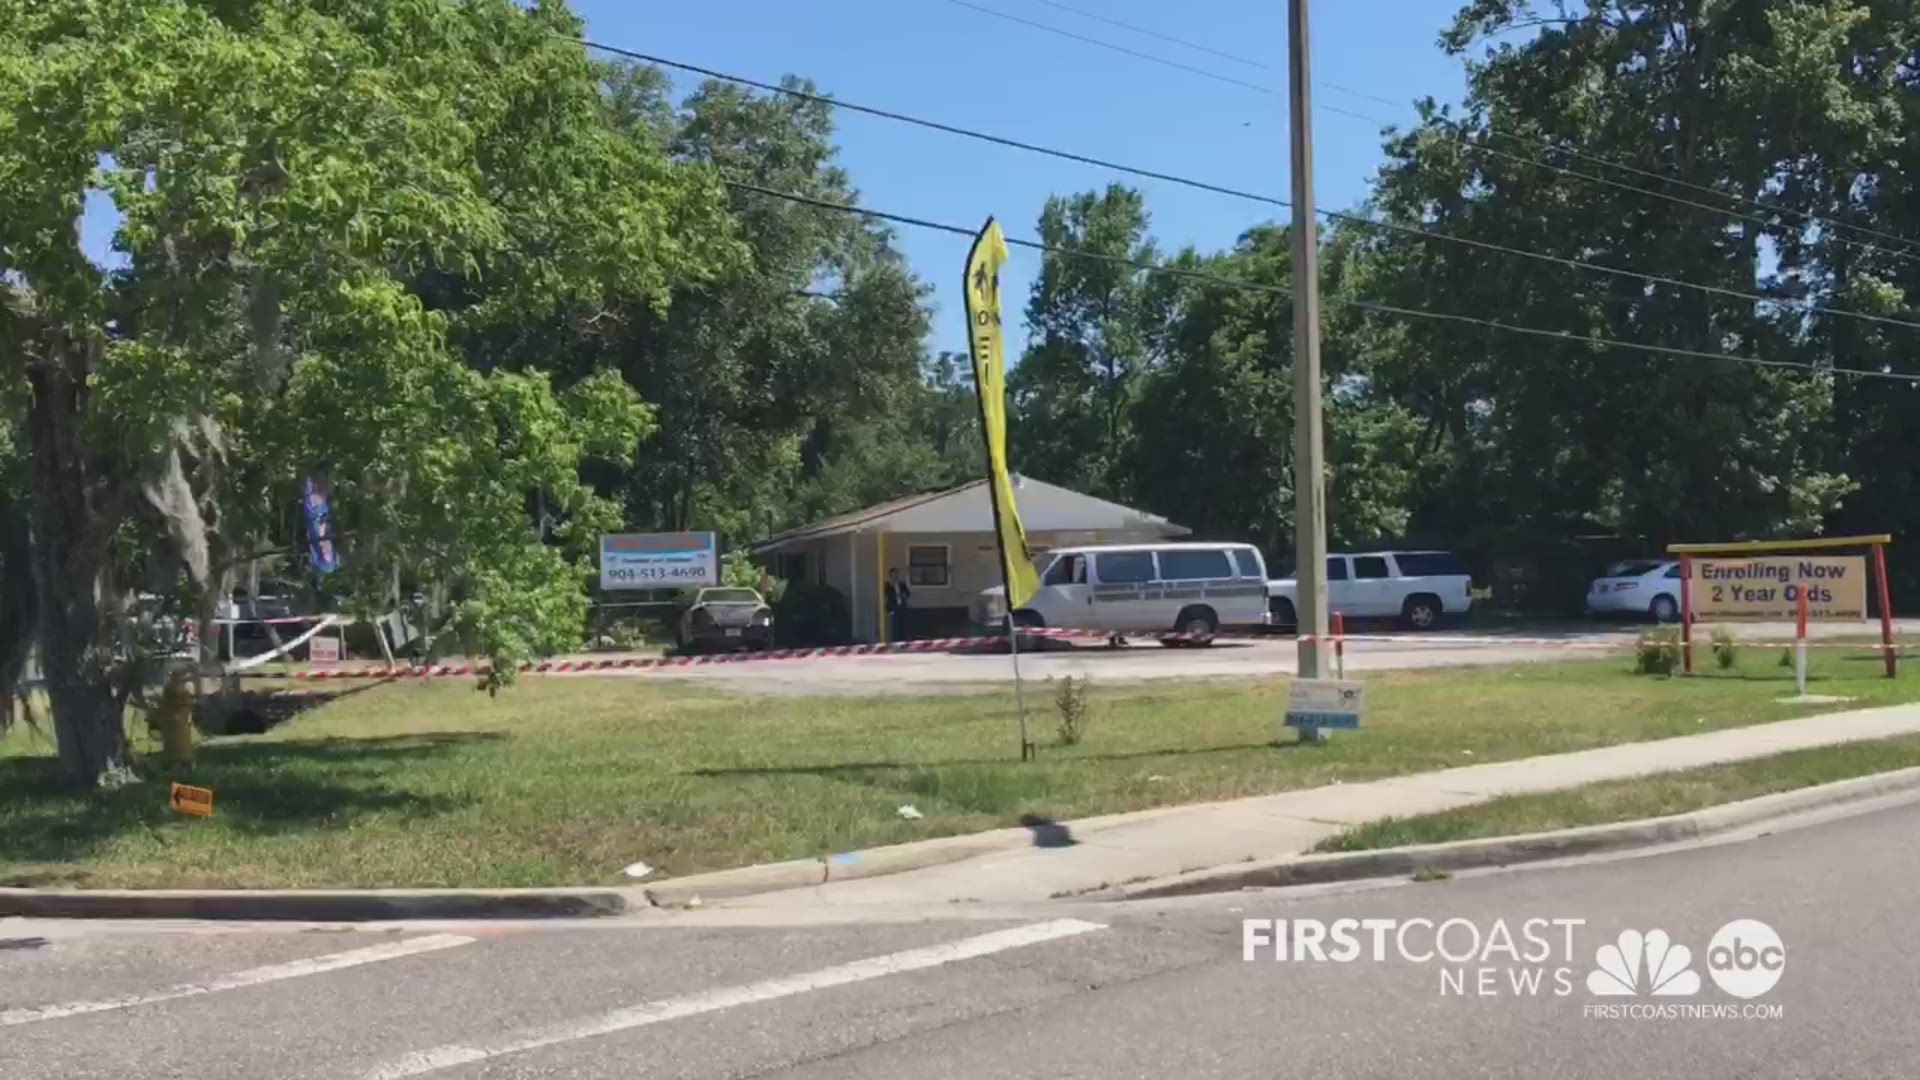 An infant has died after being left in a van at a Westside daycare, according to JSO.